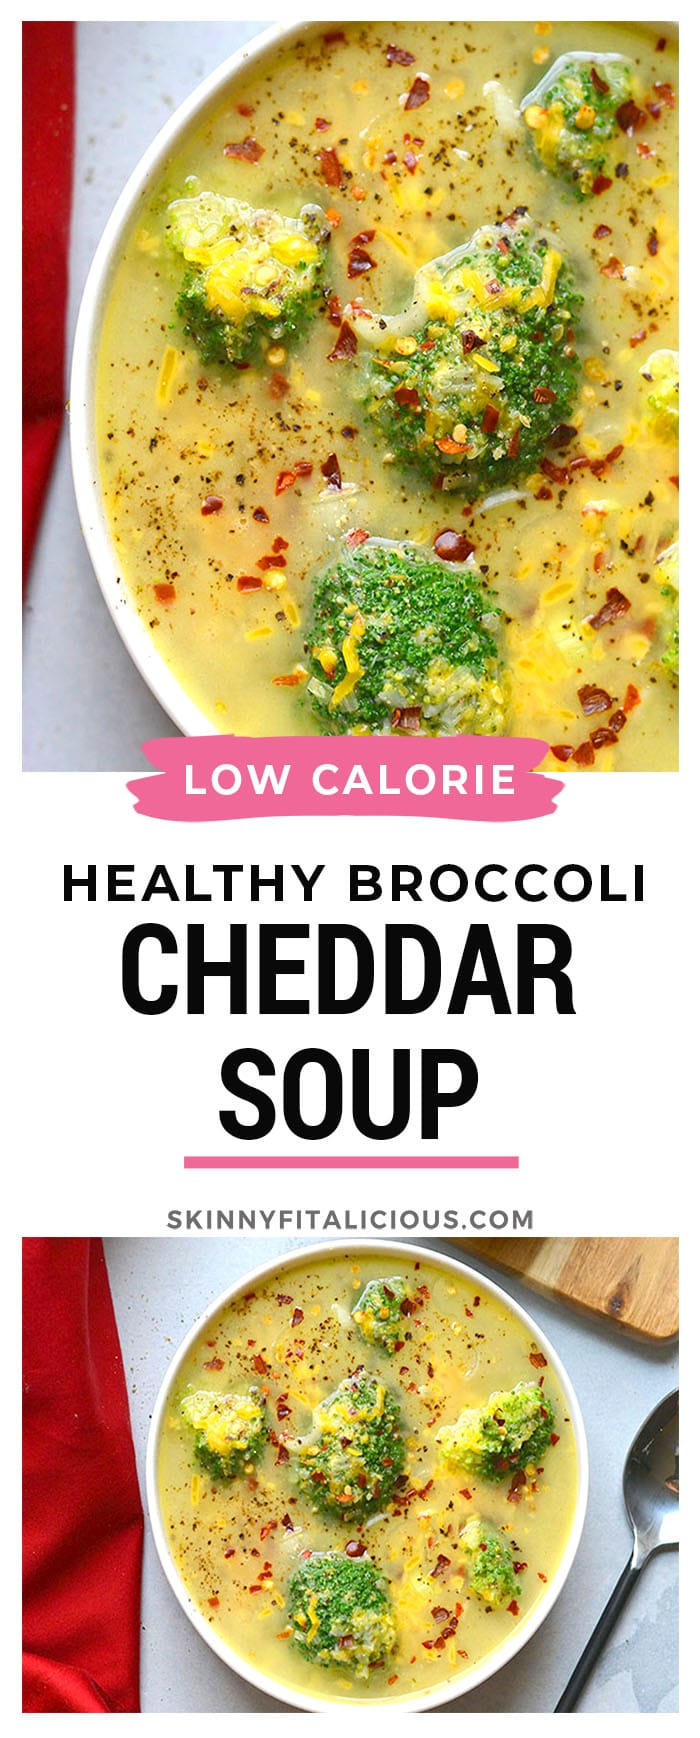 Healthy Broccoli Cheddar Soup is low calorie and made in 30 minutes with minimal ingredients. A great vegetarian soup that's also gluten free and can easily be made dairy free.